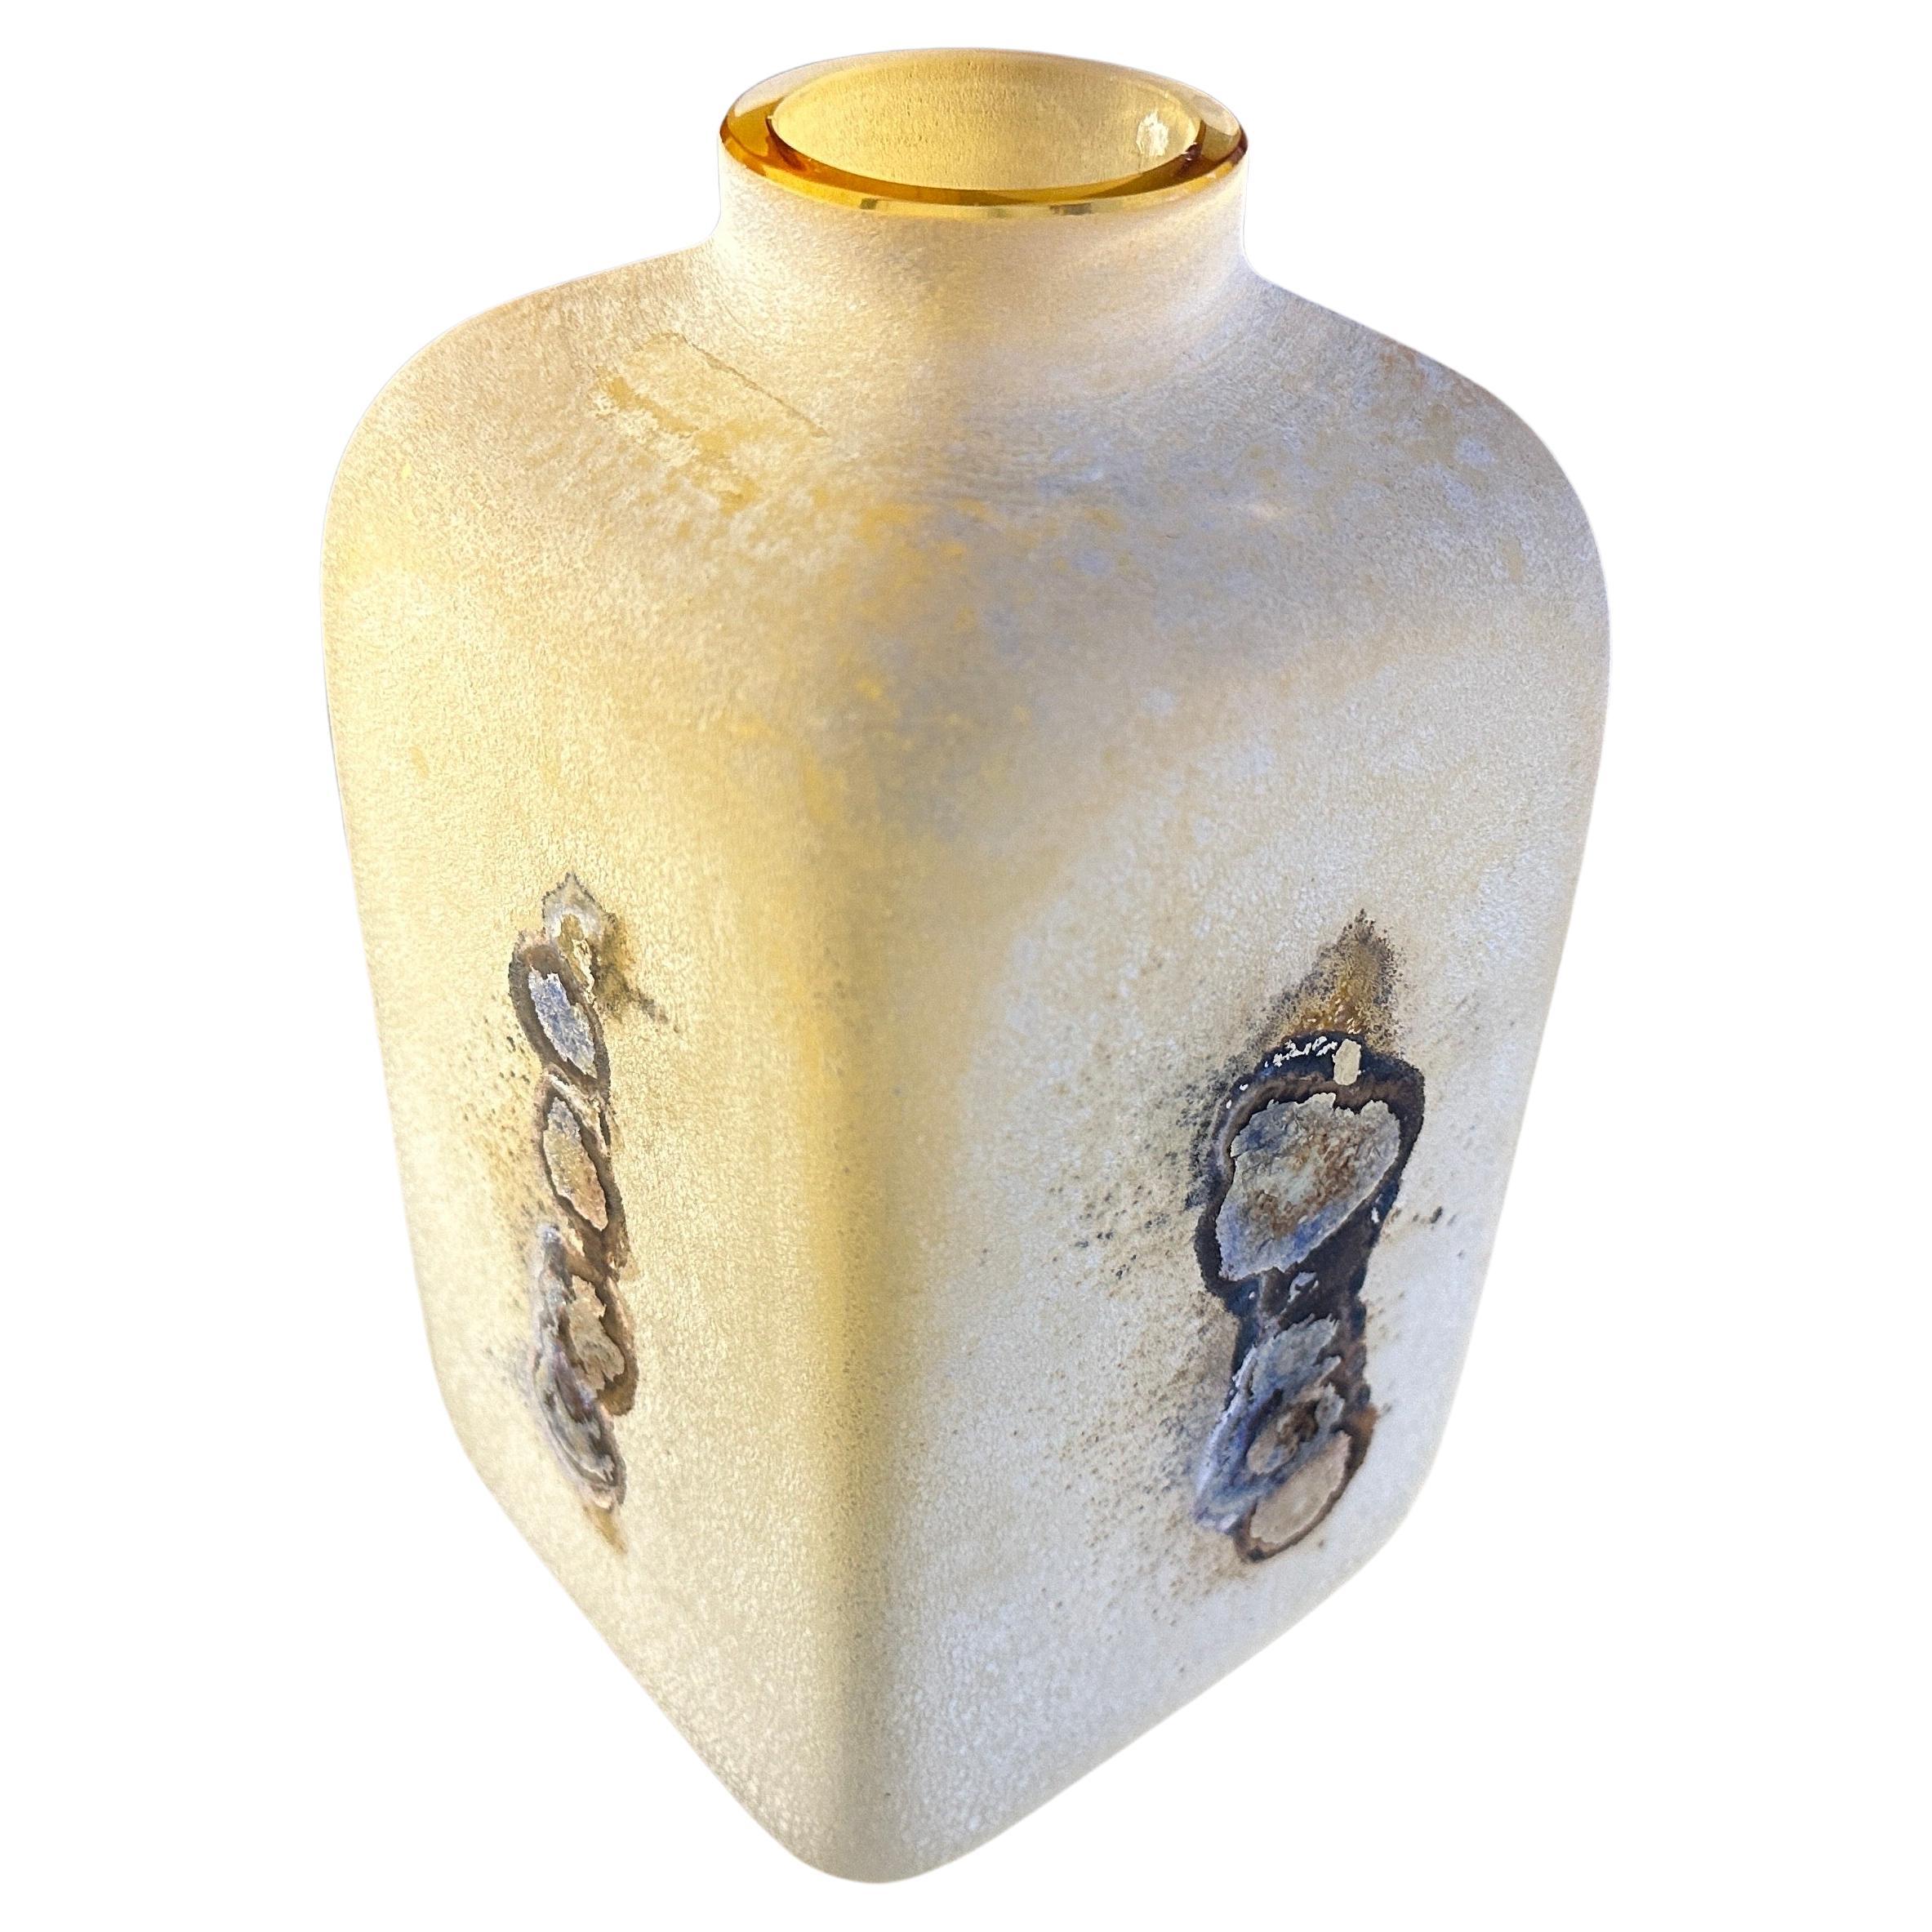 This Modernist Yellow Scavo Murano Glass Bottle by Alfredo Barbini is a stunning example of contemporary glass artistry, marrying innovation with tradition in the renowned Murano glassmaking tradition. It's also can reused as a vase and it's in